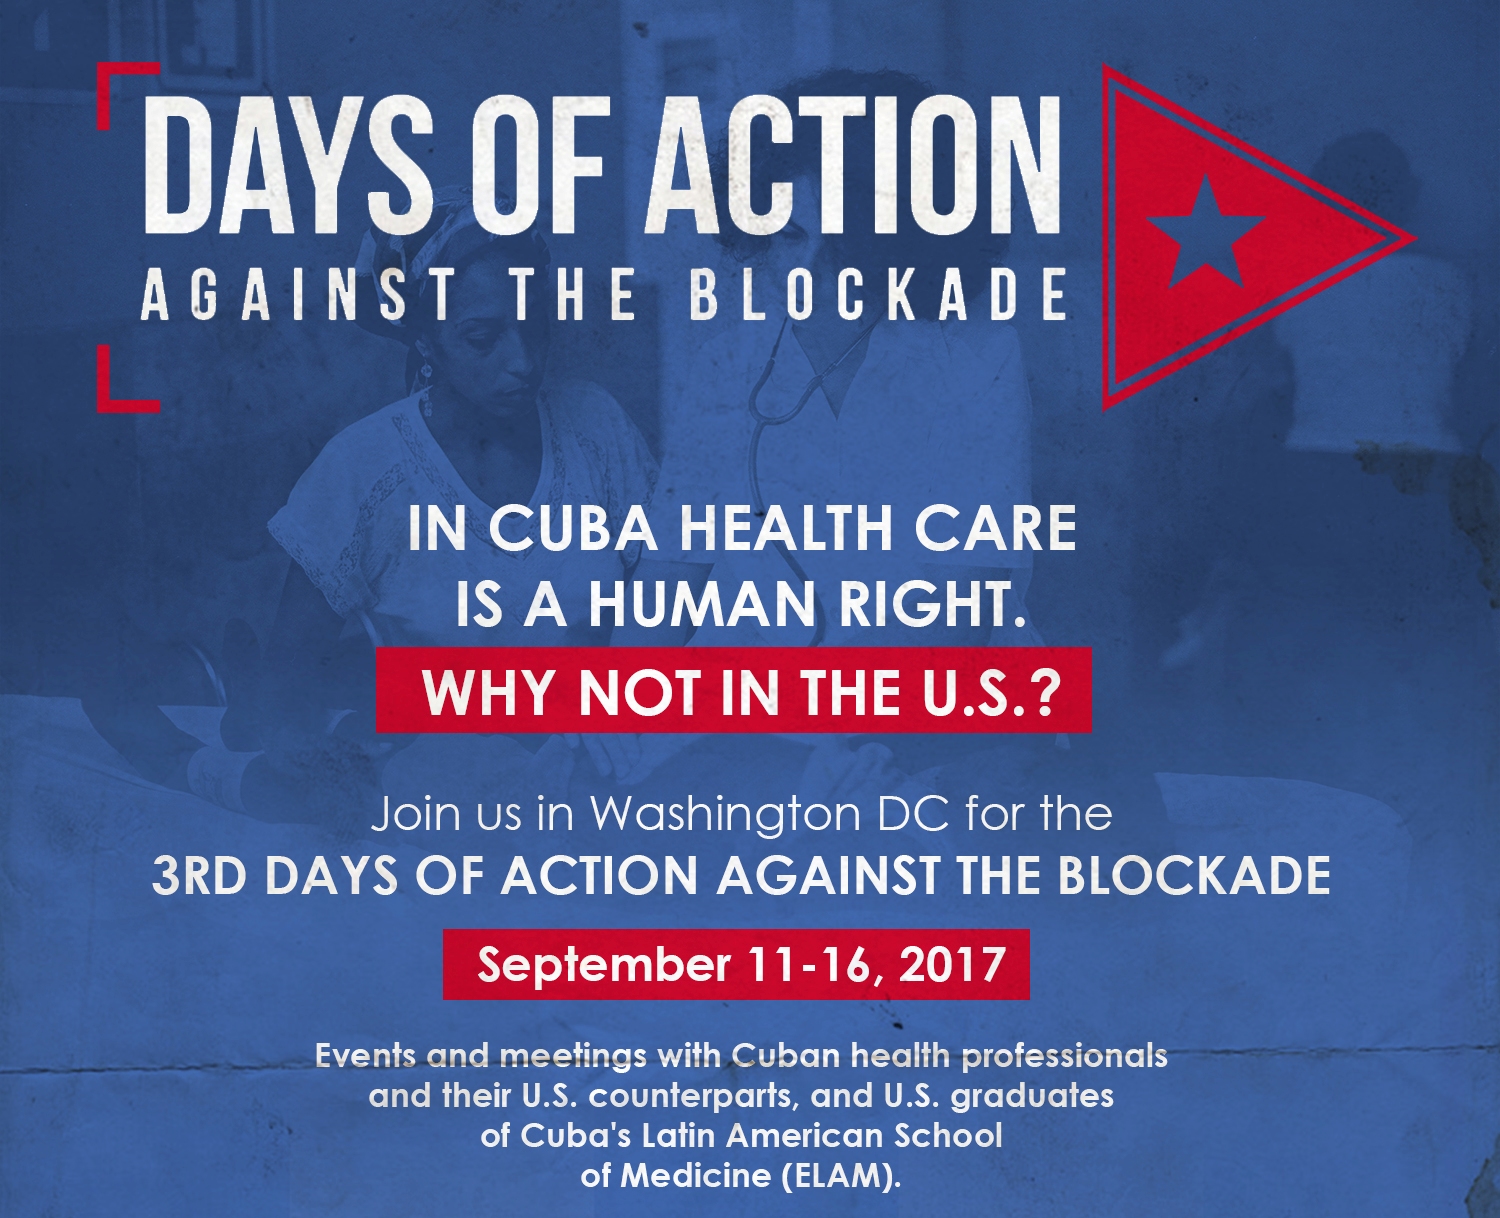 The Blockade Against Cuba & The Human Right to Healthcare